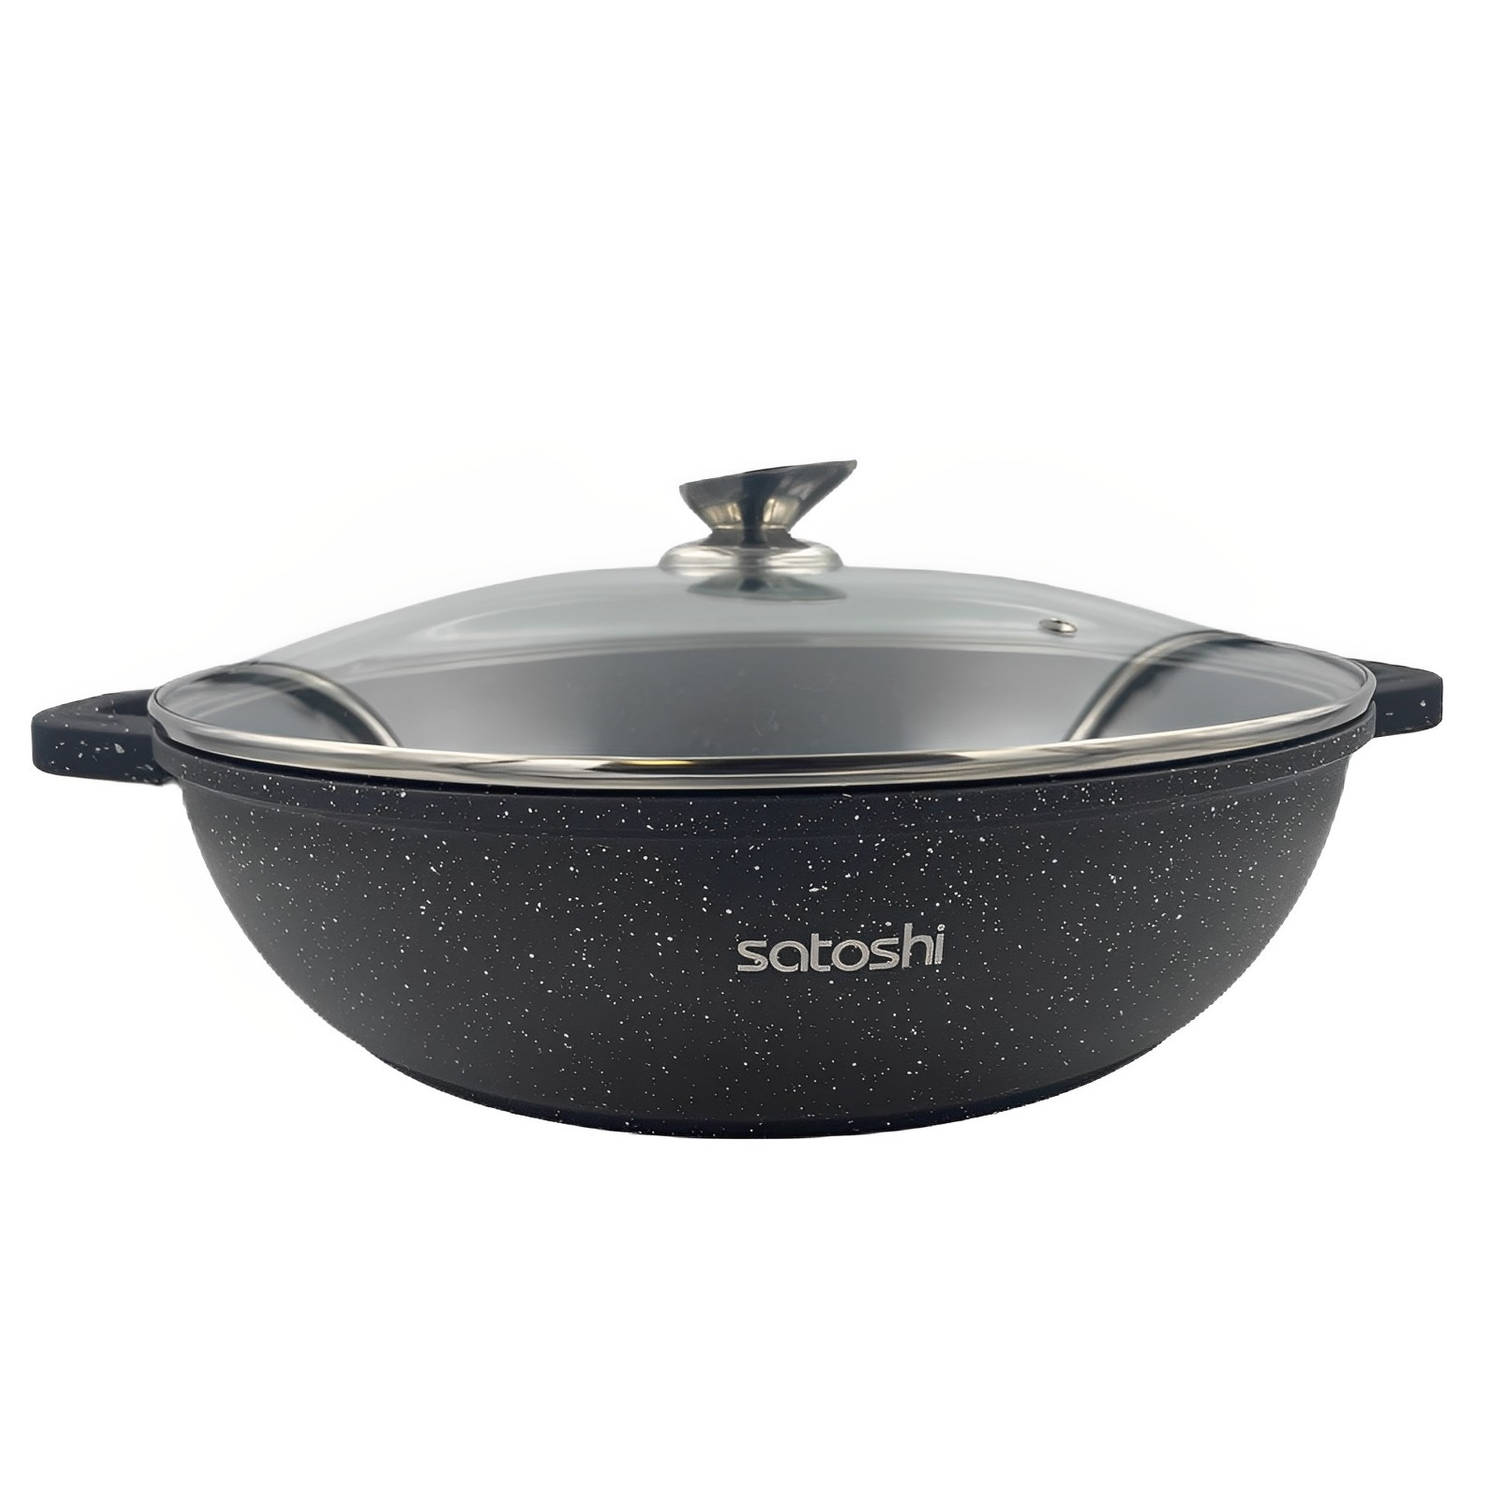 Satoshi Limoges Braadpan Ø40 CM - Marble coating - Afneembare Siliconen Cool-touch handgrepen - 18.7L